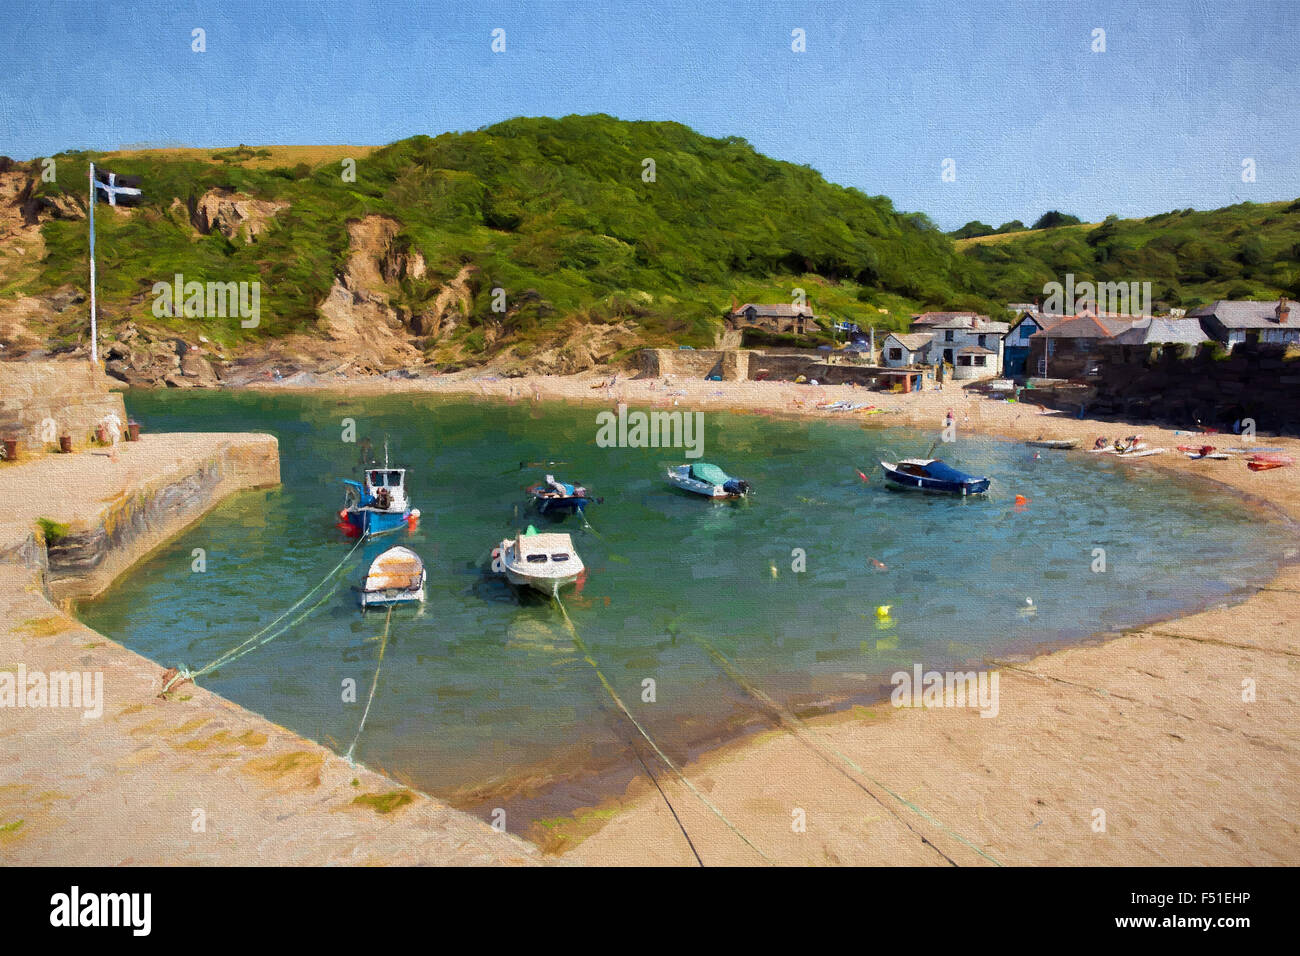 Boats Polkerris harbour Cornwall England uk on a beautiful summer day illustration like oil painting Stock Photo